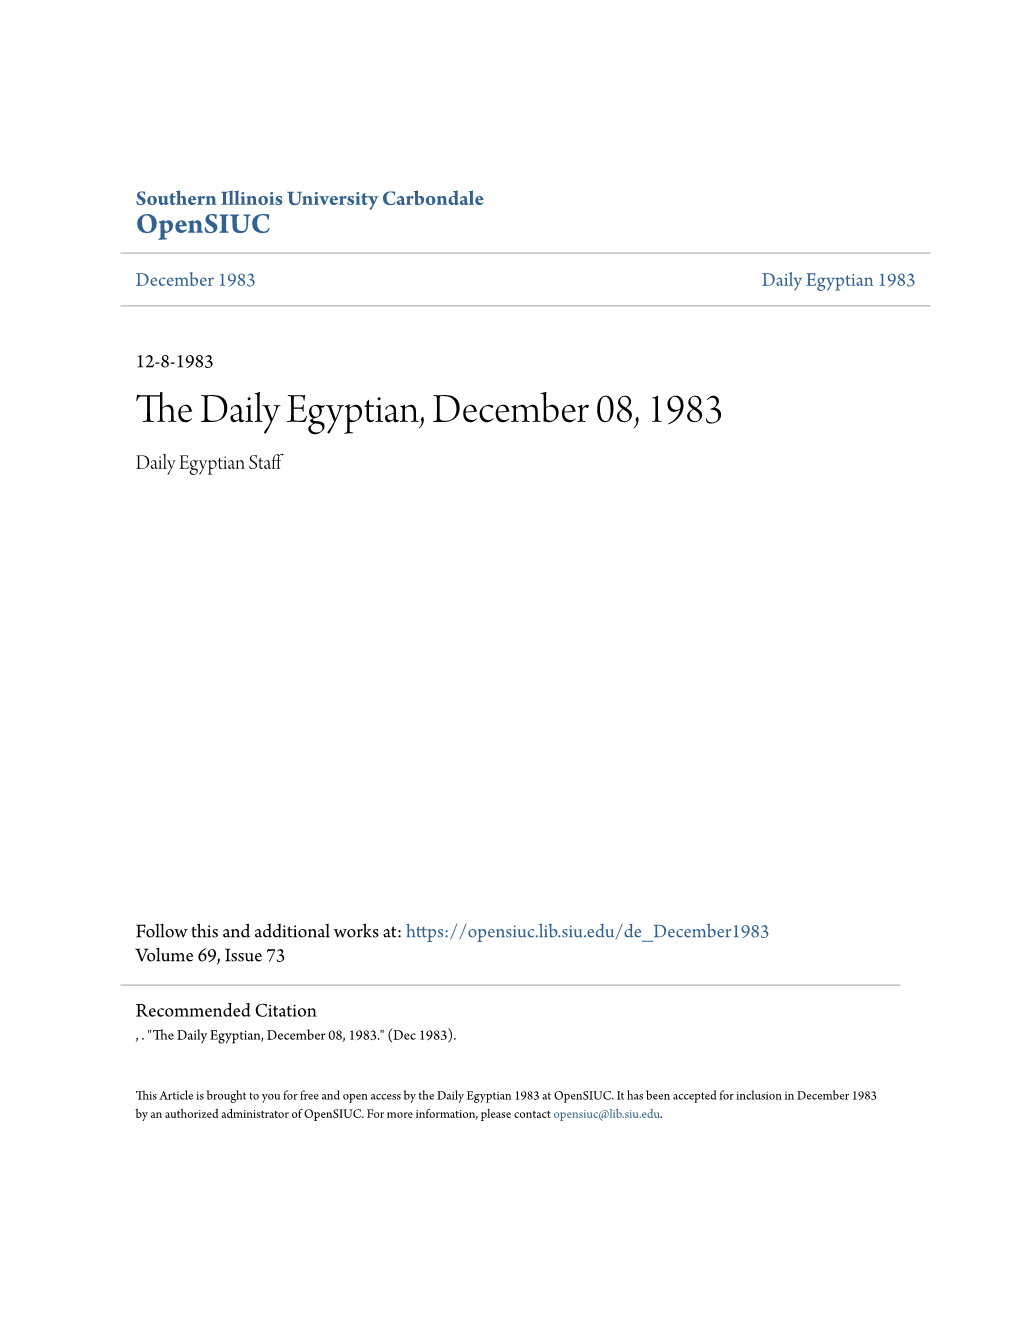 The Daily Egyptian, December 08, 1983